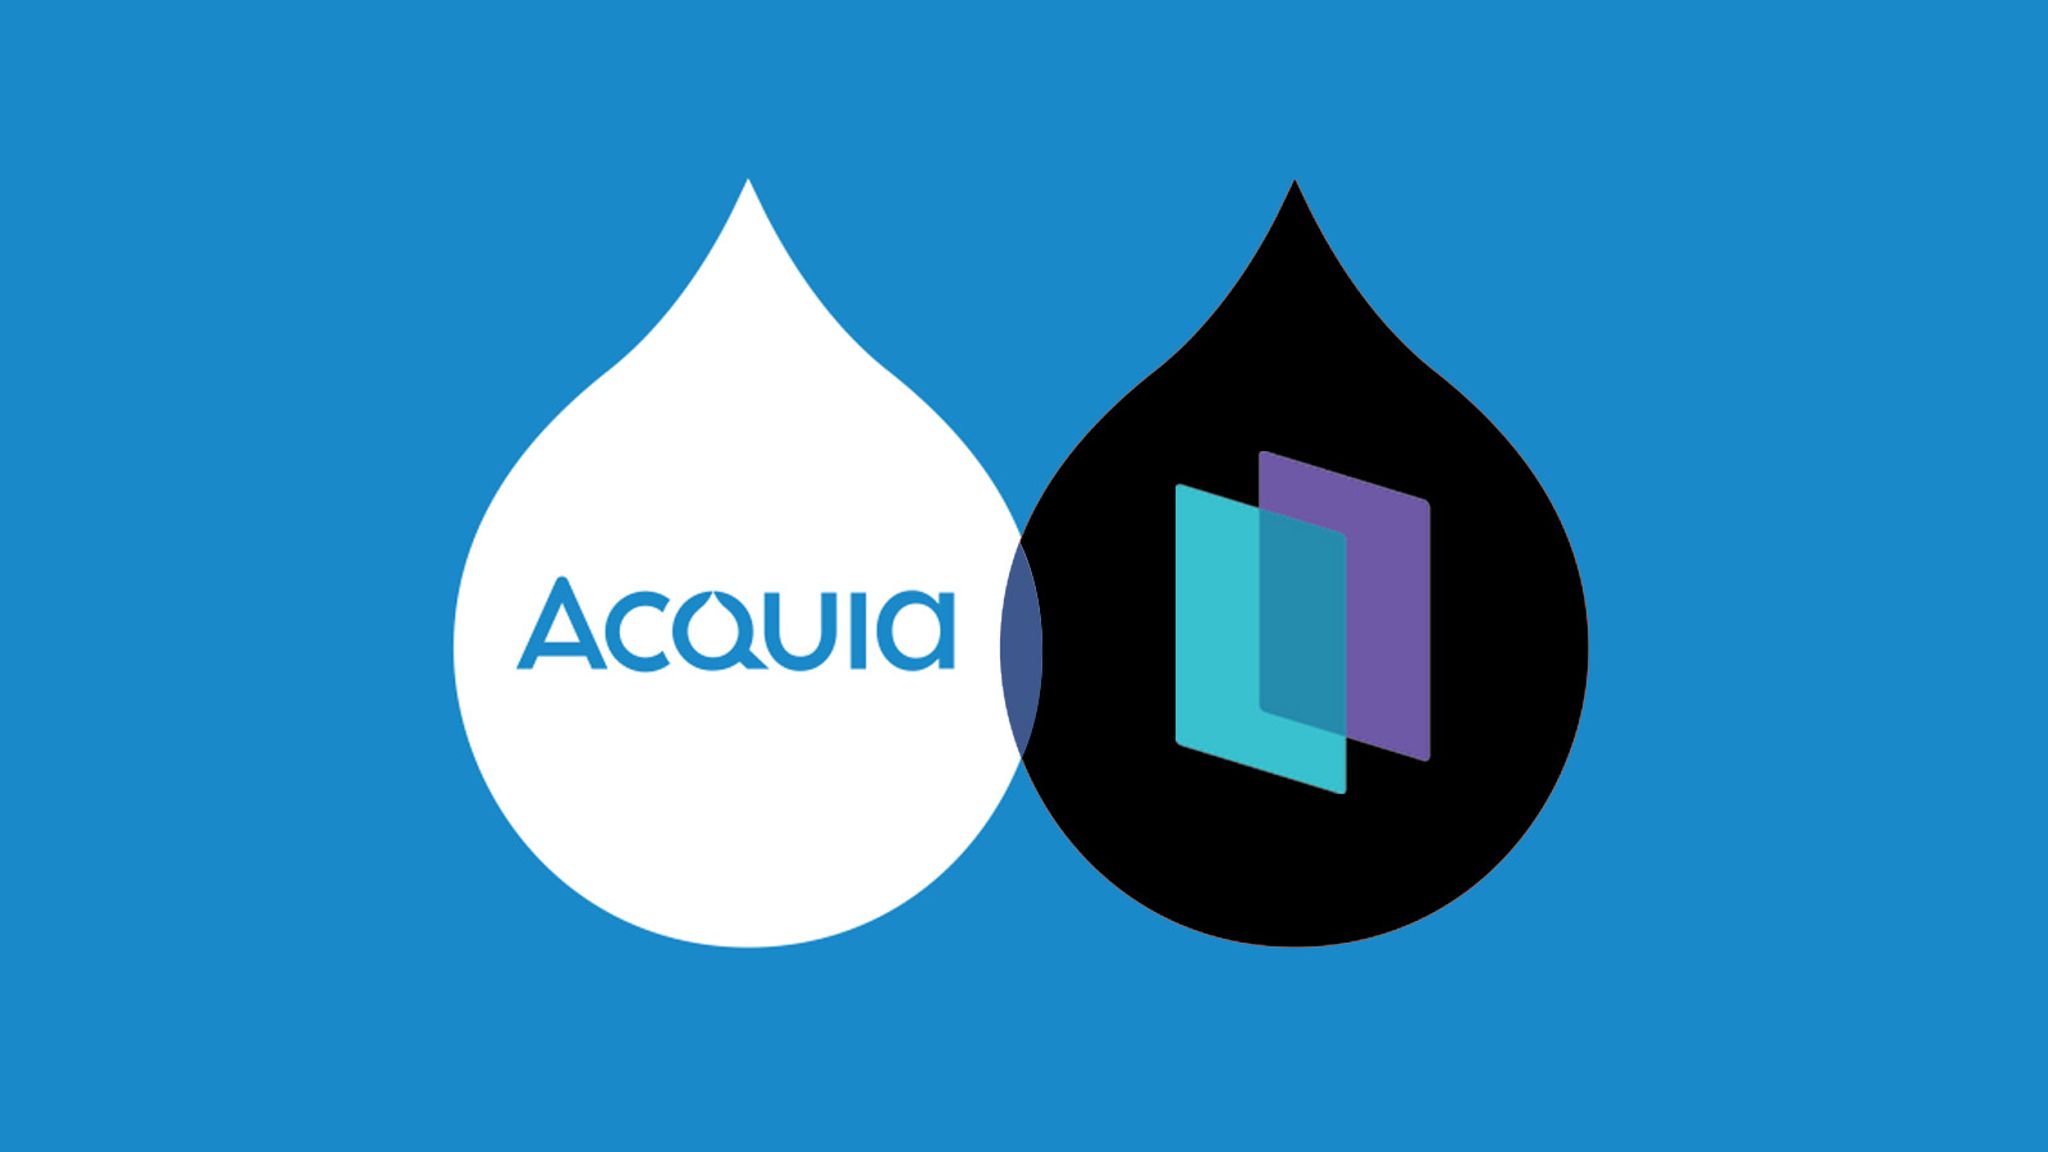 Acquia logo and Monsido logo icon inside two droplet icons against a blue background.